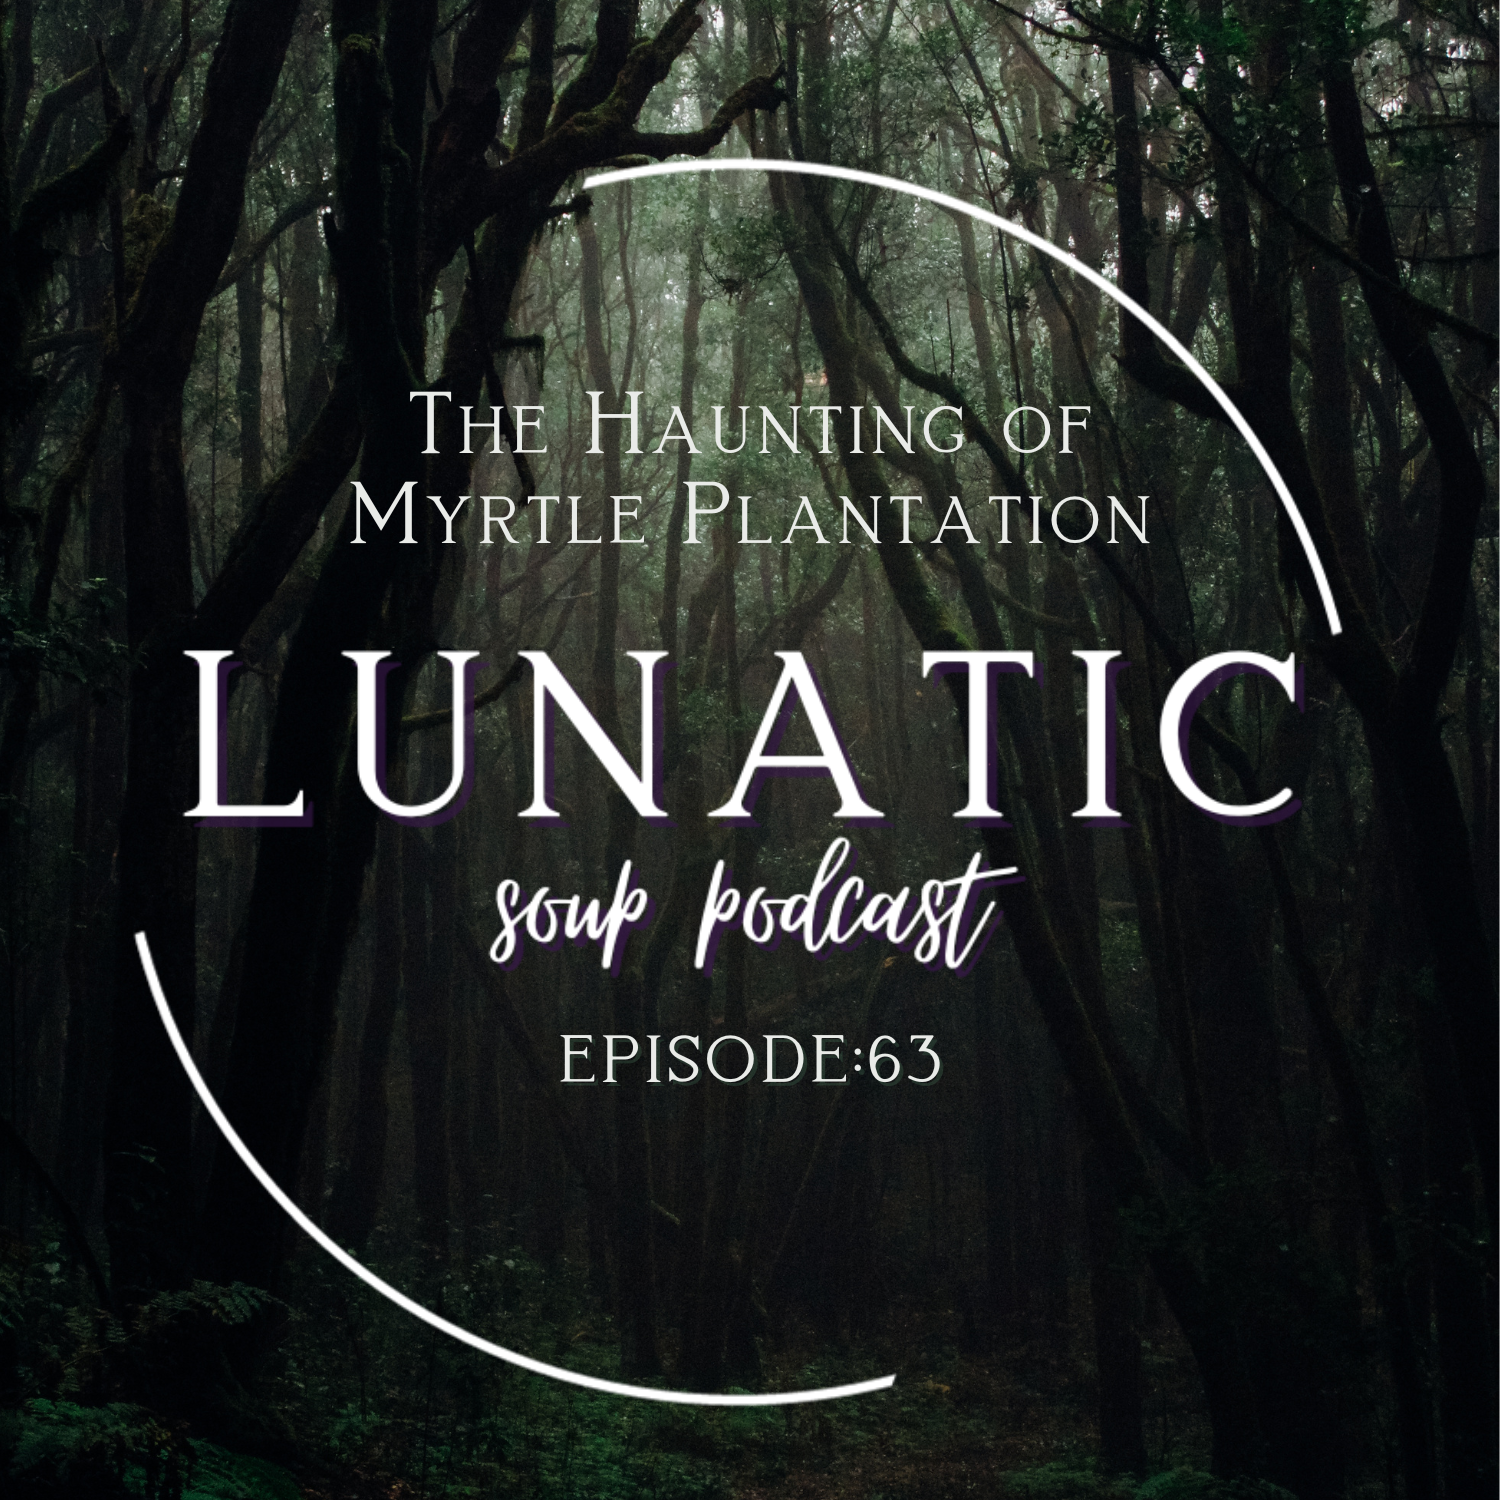 The Haunting of Myrtle Plantation